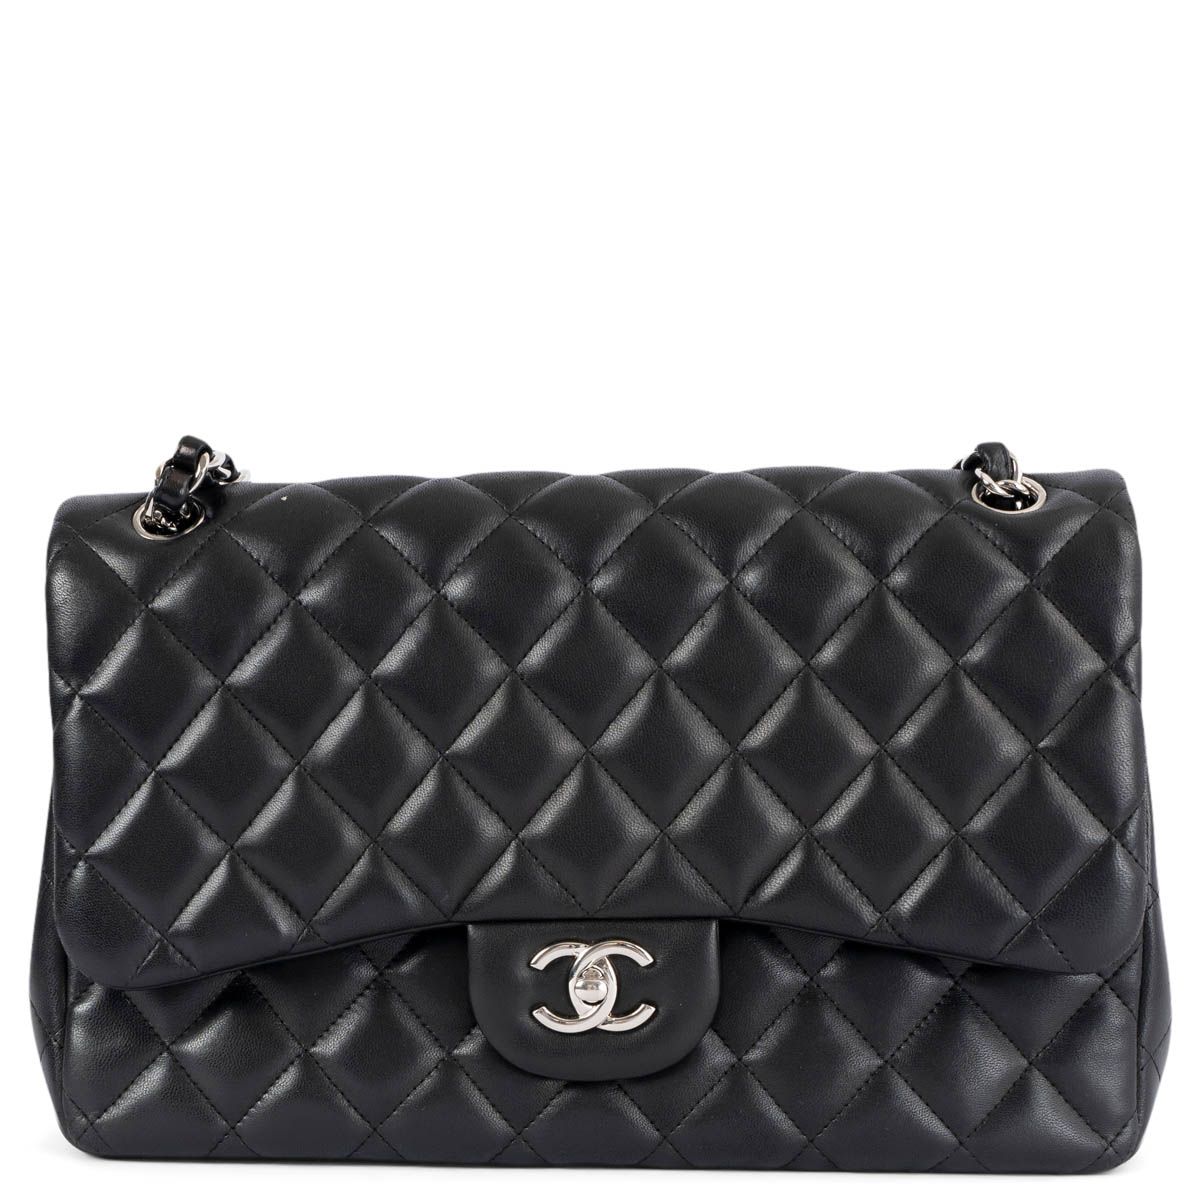 chanel pouch insert to convert as crossbody